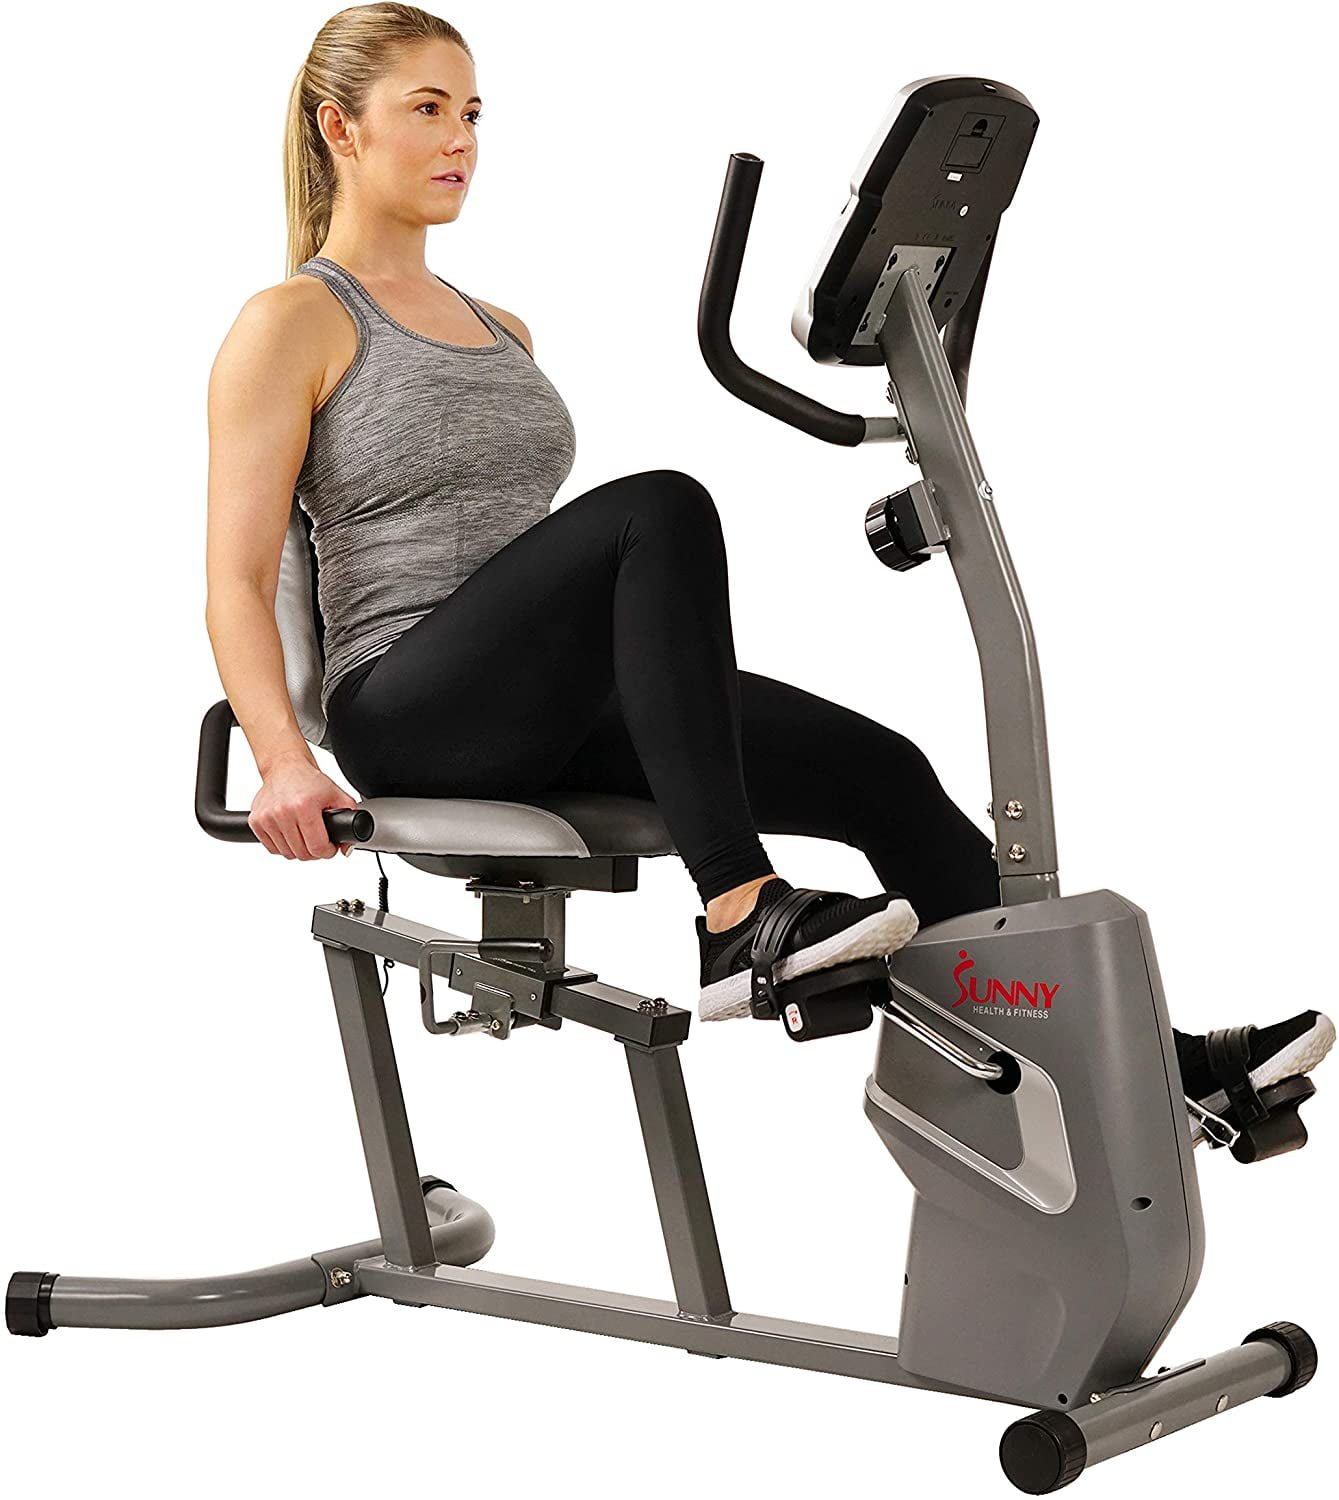 Sunny Health &amp; Fitness Magnetic Recumbent Bike Exercise Bike with Easy Adjustable Seat, Device Holder, RPM and Pulse Rate Monitoring - SF-RB4806